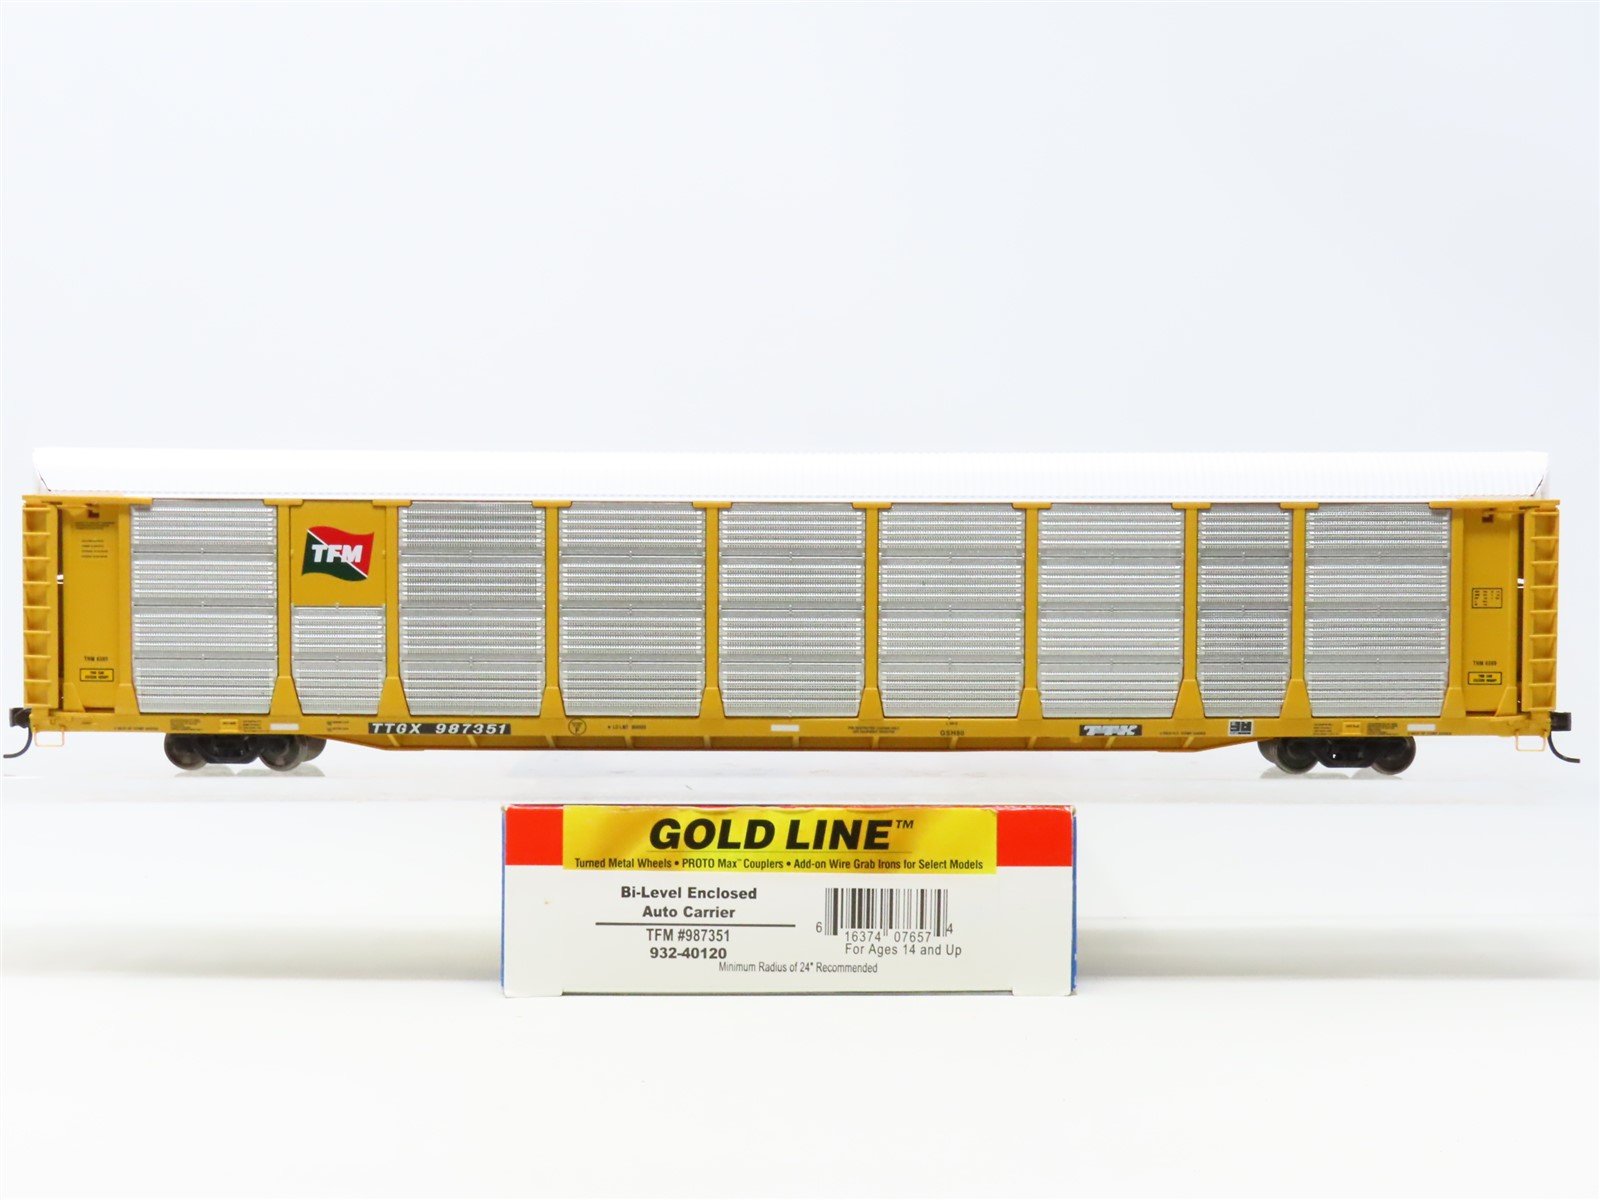 HO Walthers Gold Line 932-40120 TTGX TFM Bi-Level Enclosed Auto Carrier #987351